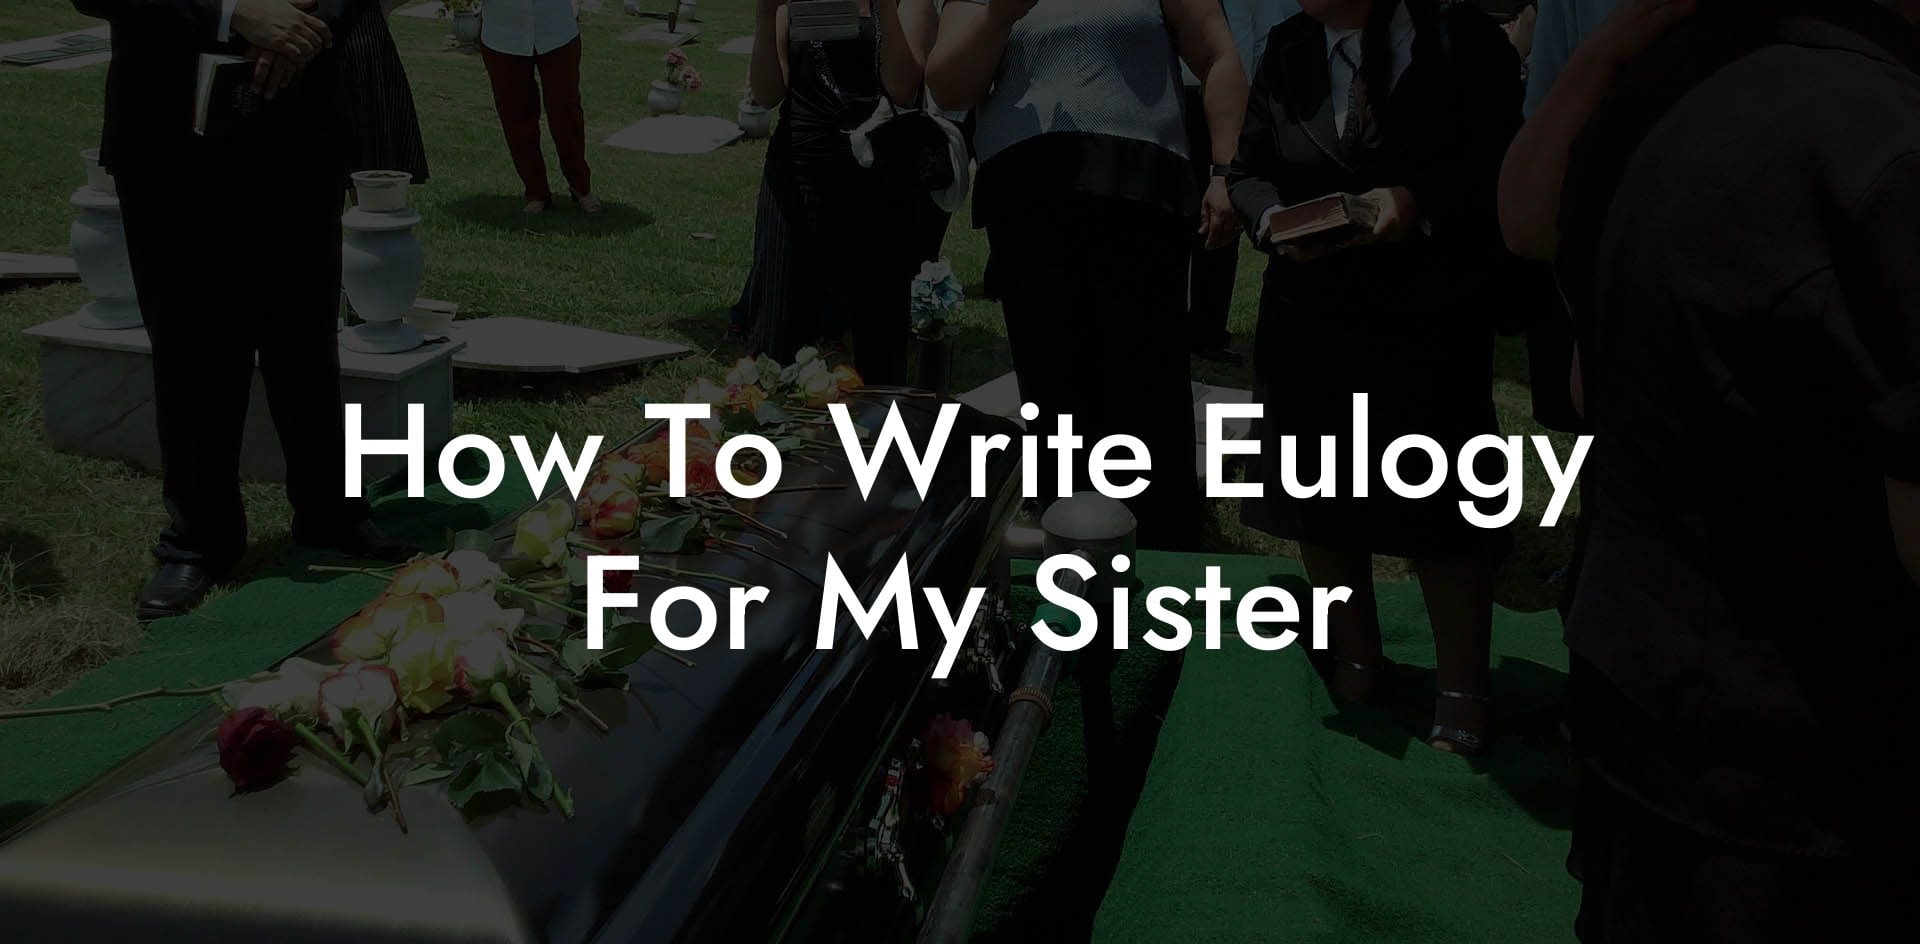 How To Write Eulogy For My Sister